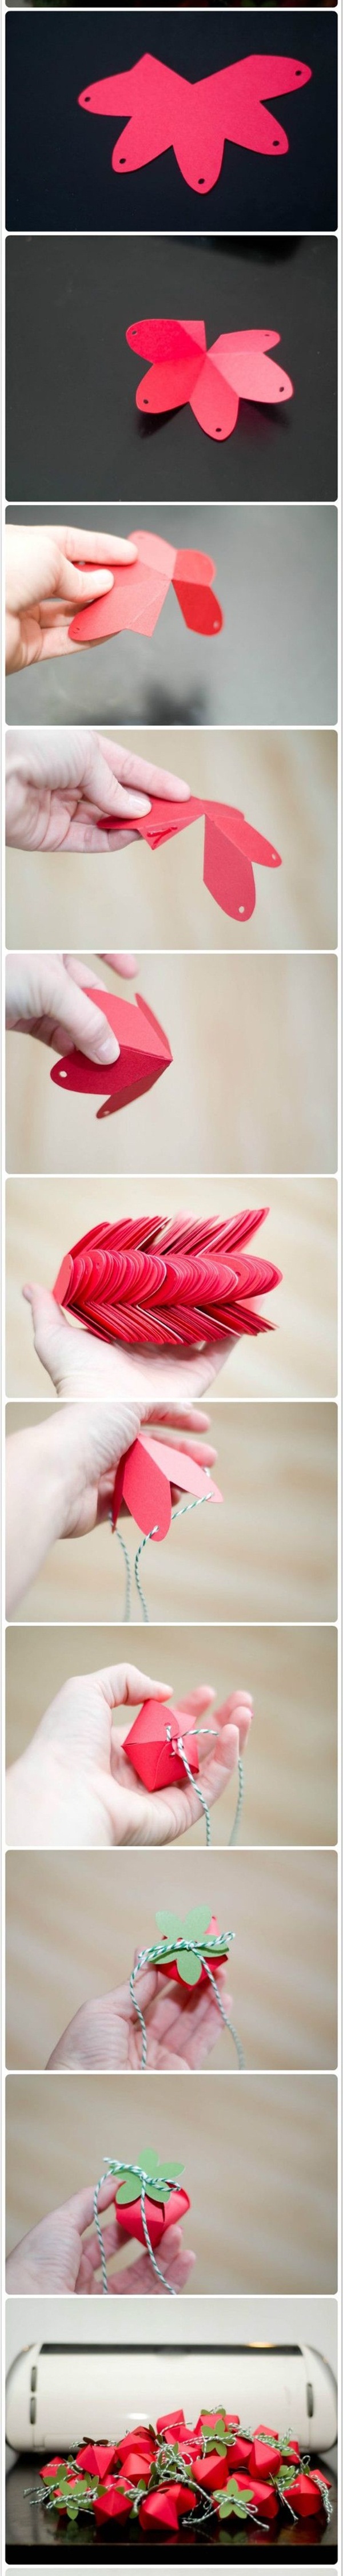 Easy-Origami-for-Kids18 DIY Easy Origami Paper Craft Tutorials (Step by Step)